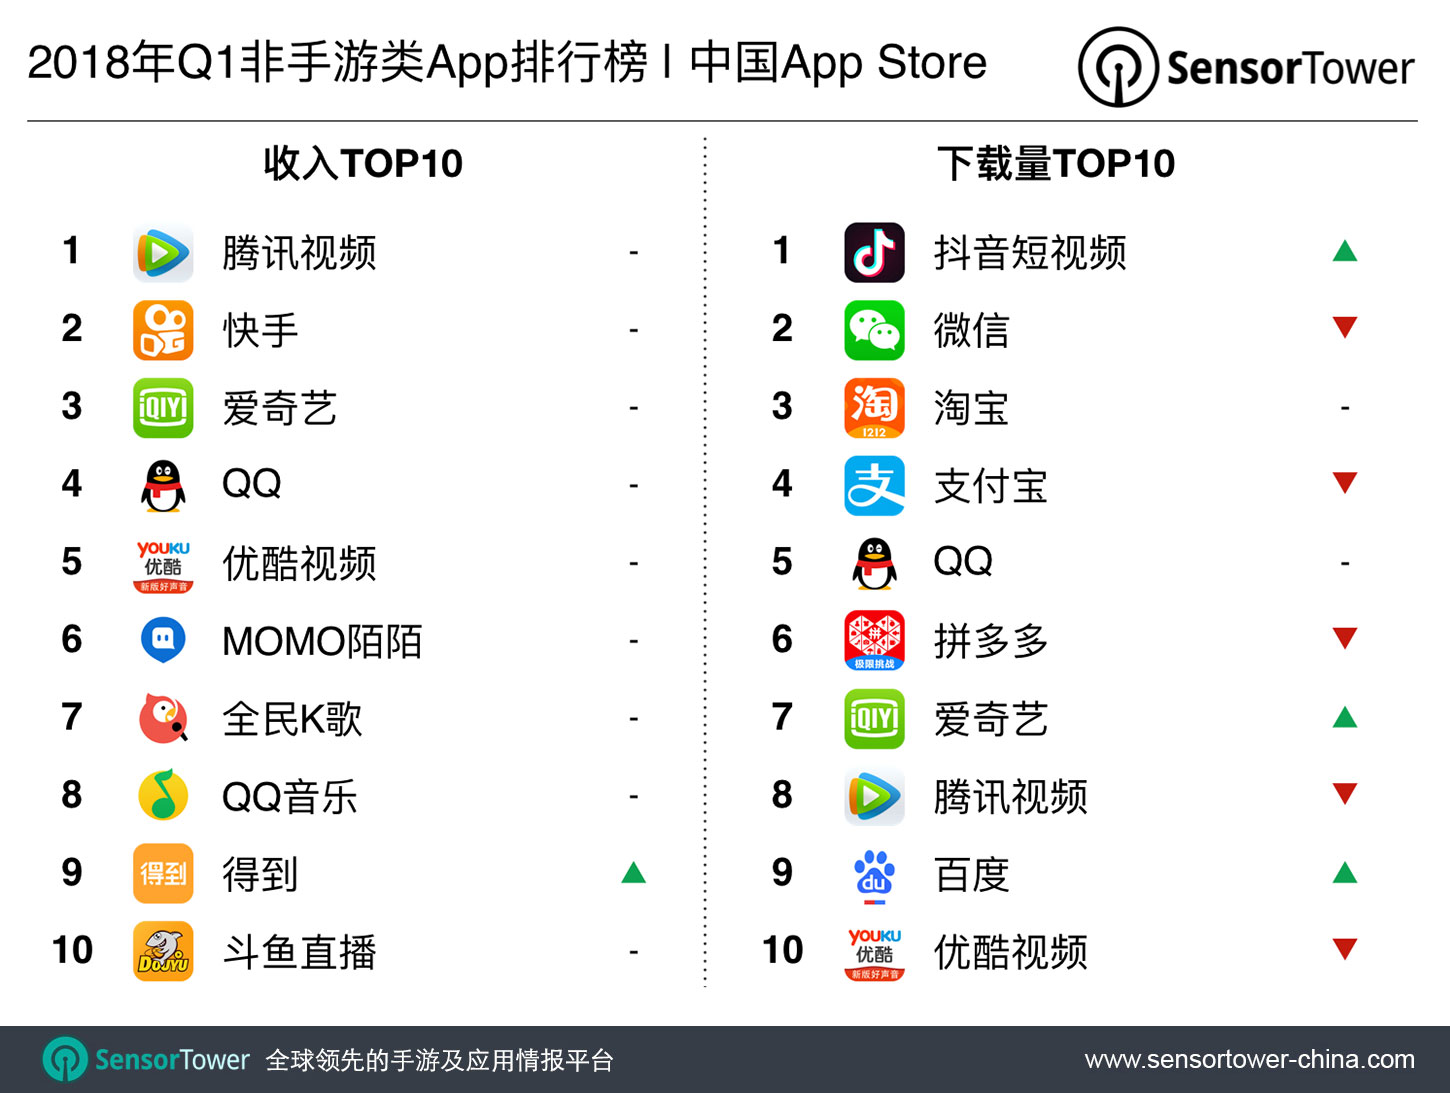 2018 Q1 CN iOS Top 10 Non-Game Apps by Revenue and Download